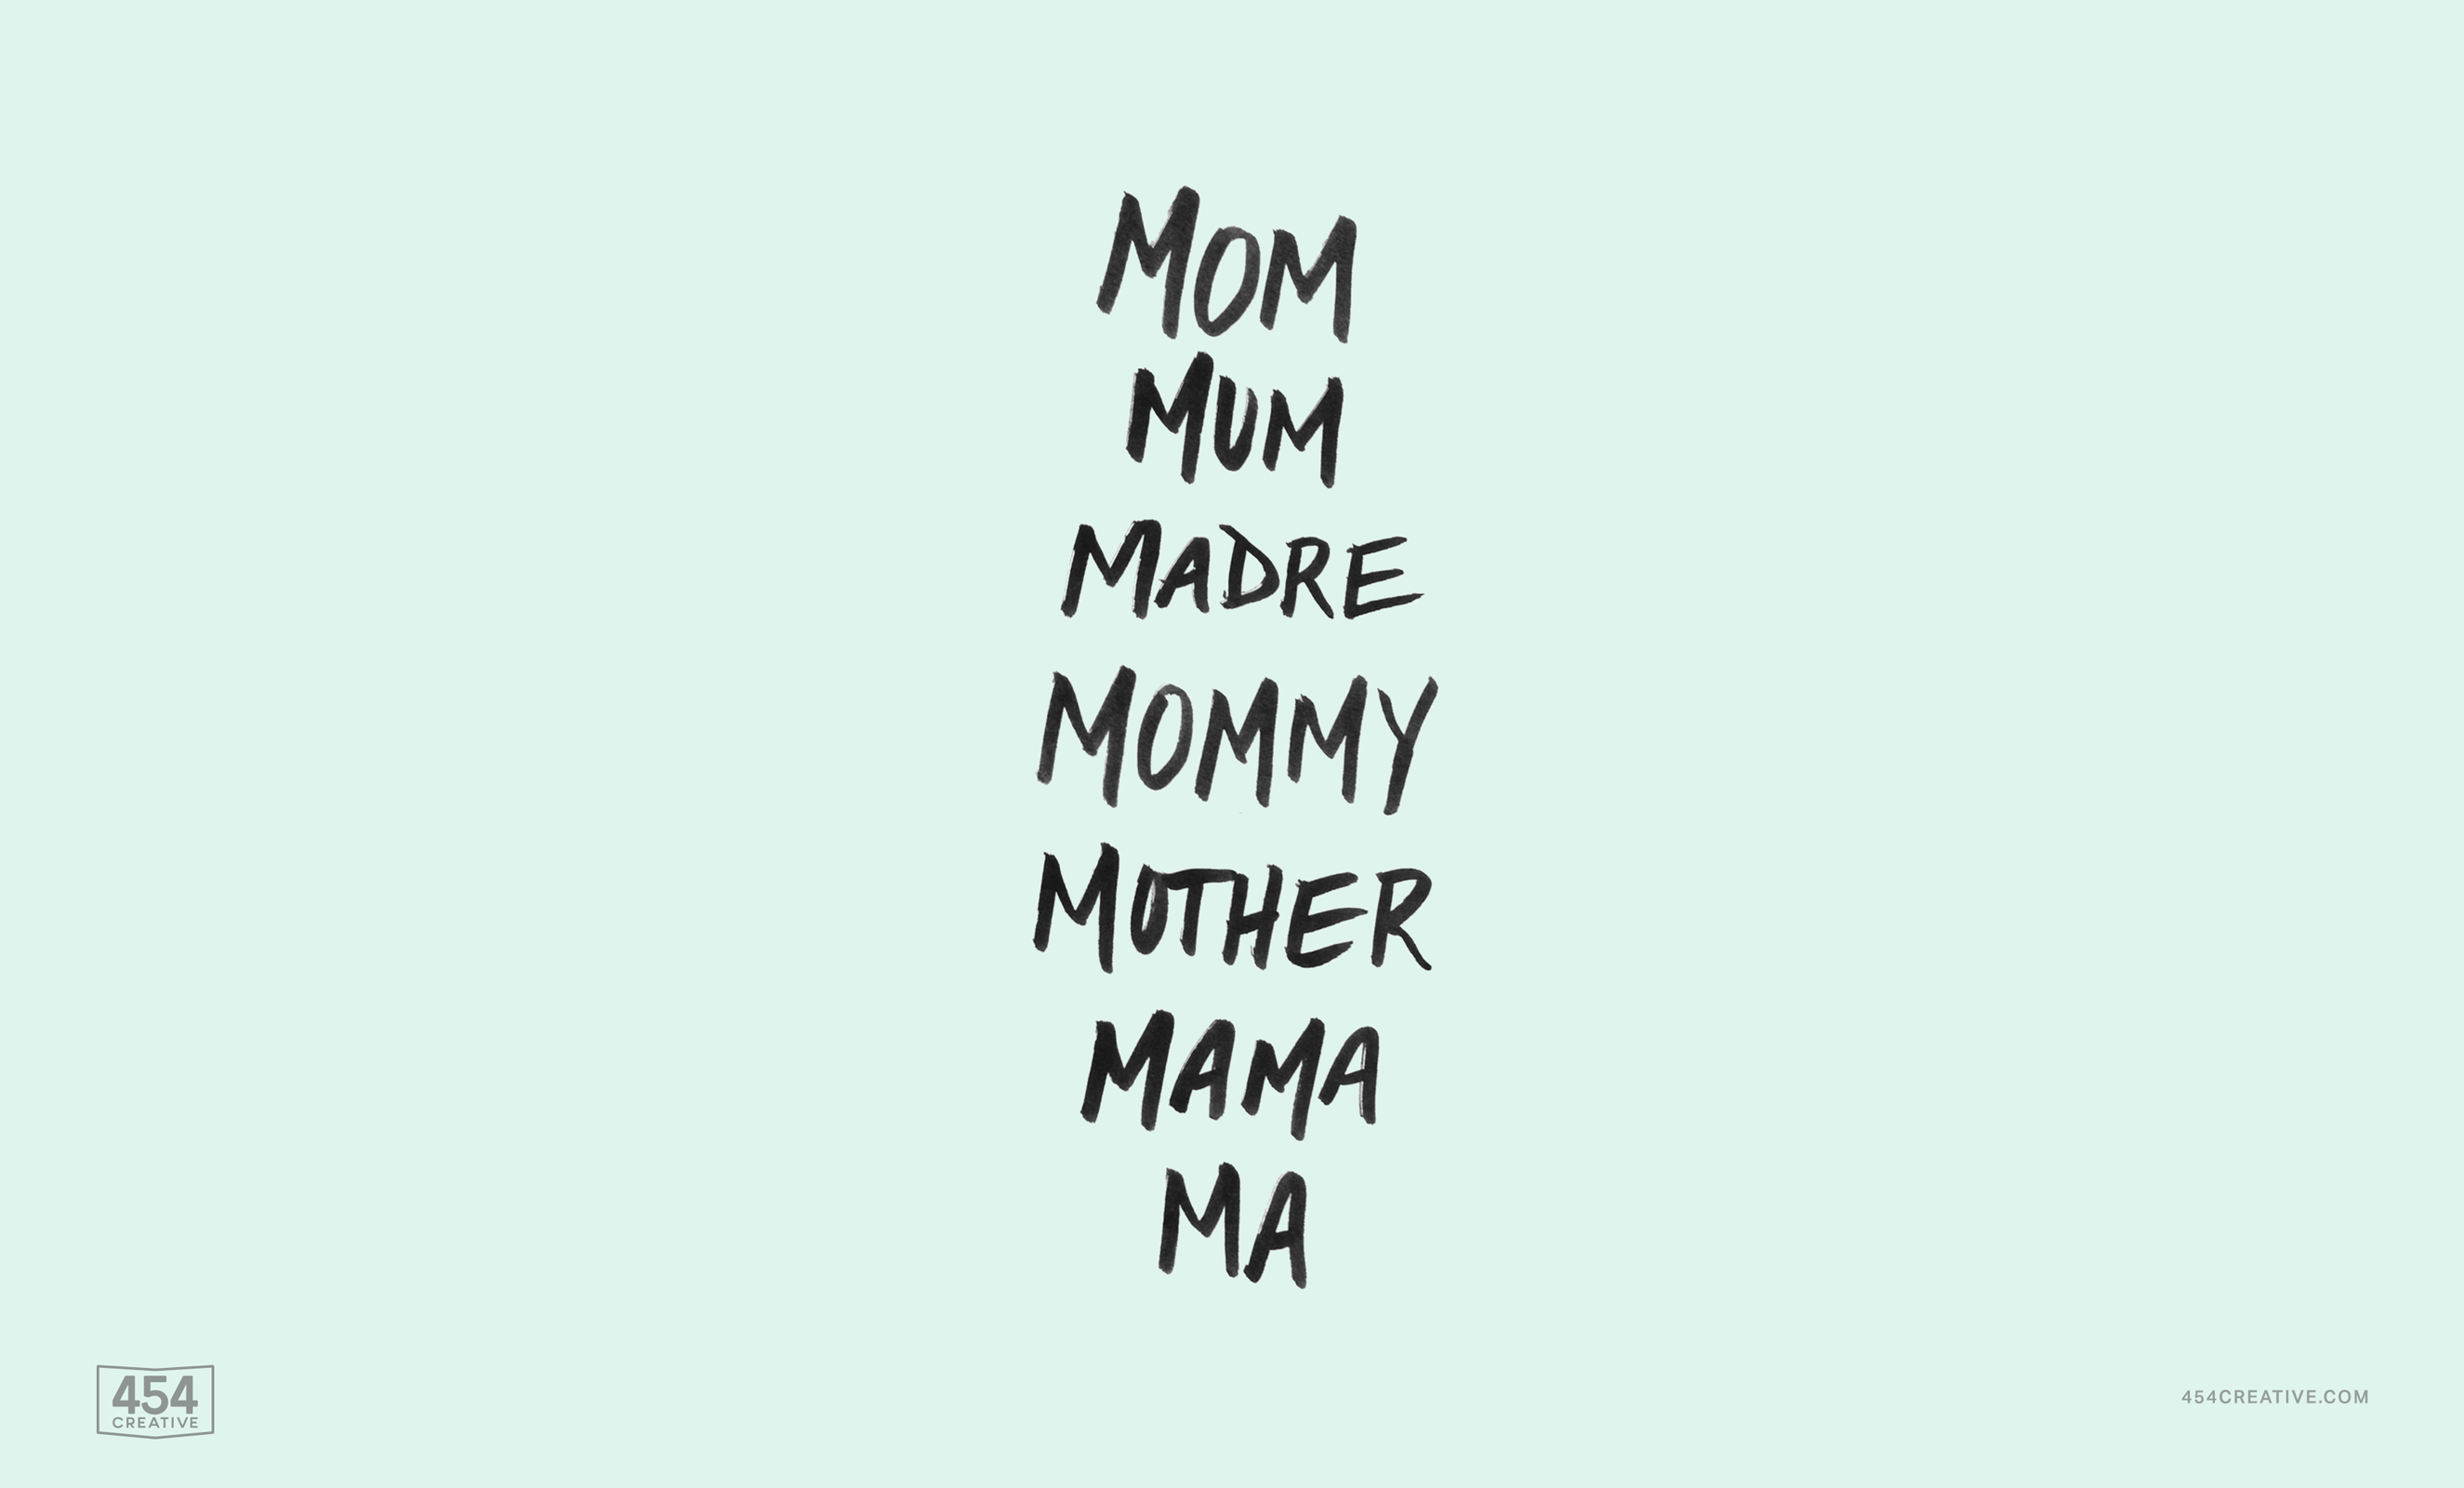 Download I Love You Mom wallpaper by Ikhlas Ilyas  bd  Free on ZEDGE  now Browse millions of popular New latest Wallp  I love you mom Love  you mom I love mom